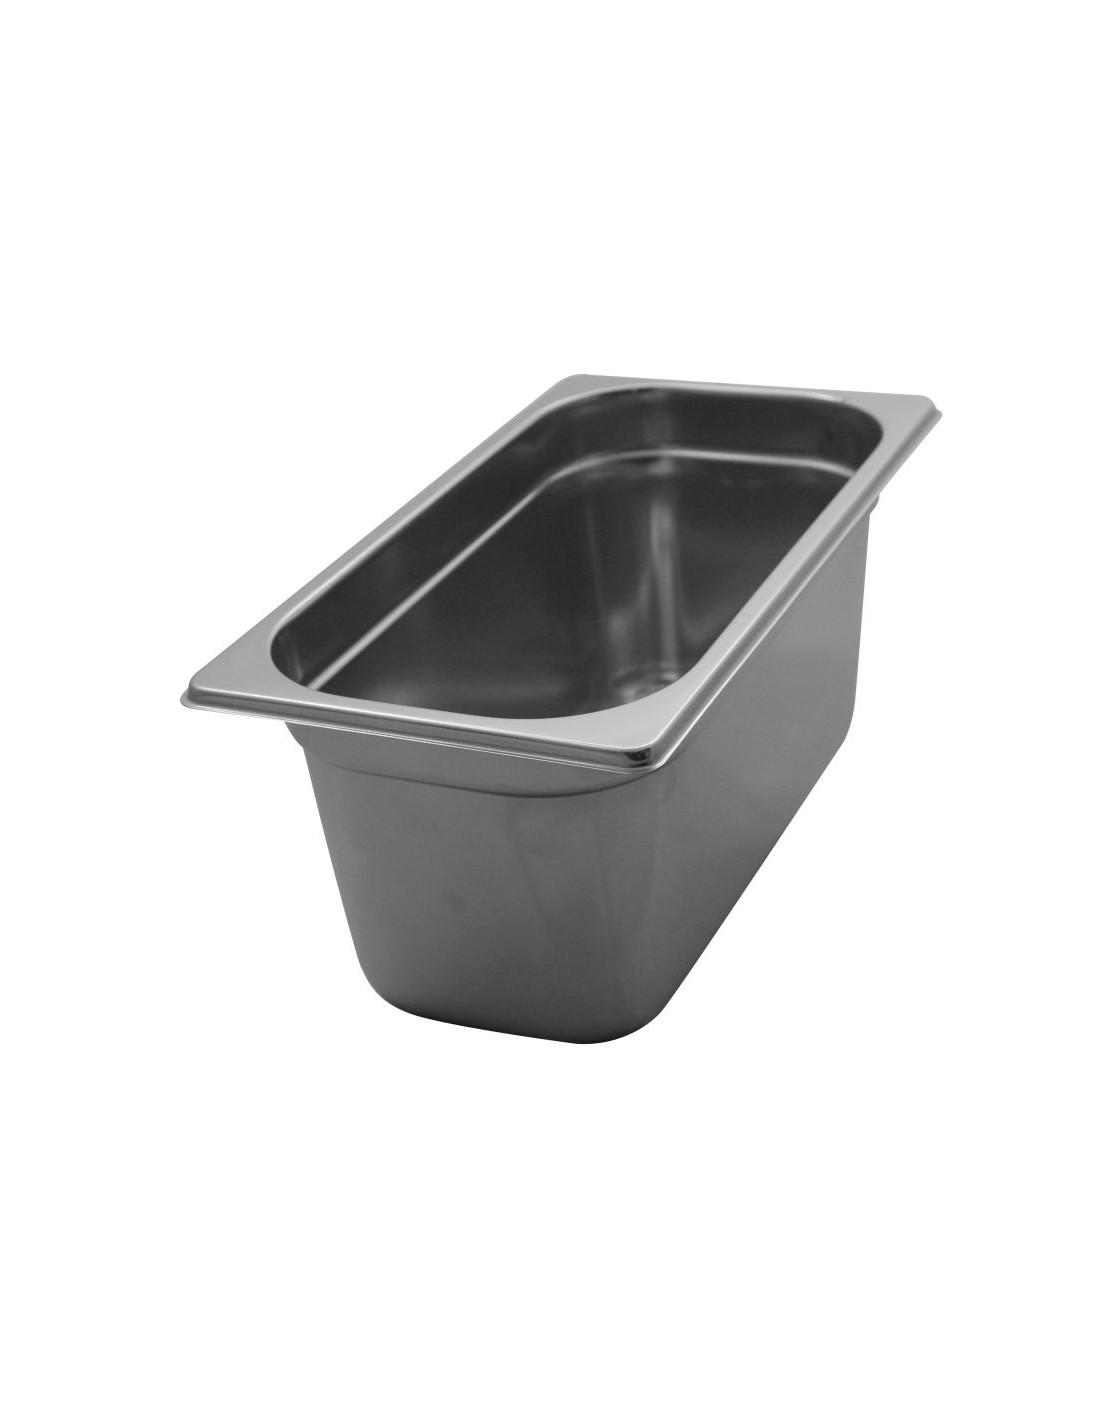 Stainless steel gastronorm containers 1/3 H. 15 cm - Capacity 5.9 liters - Dimensions 32.5 x 17.6 cm